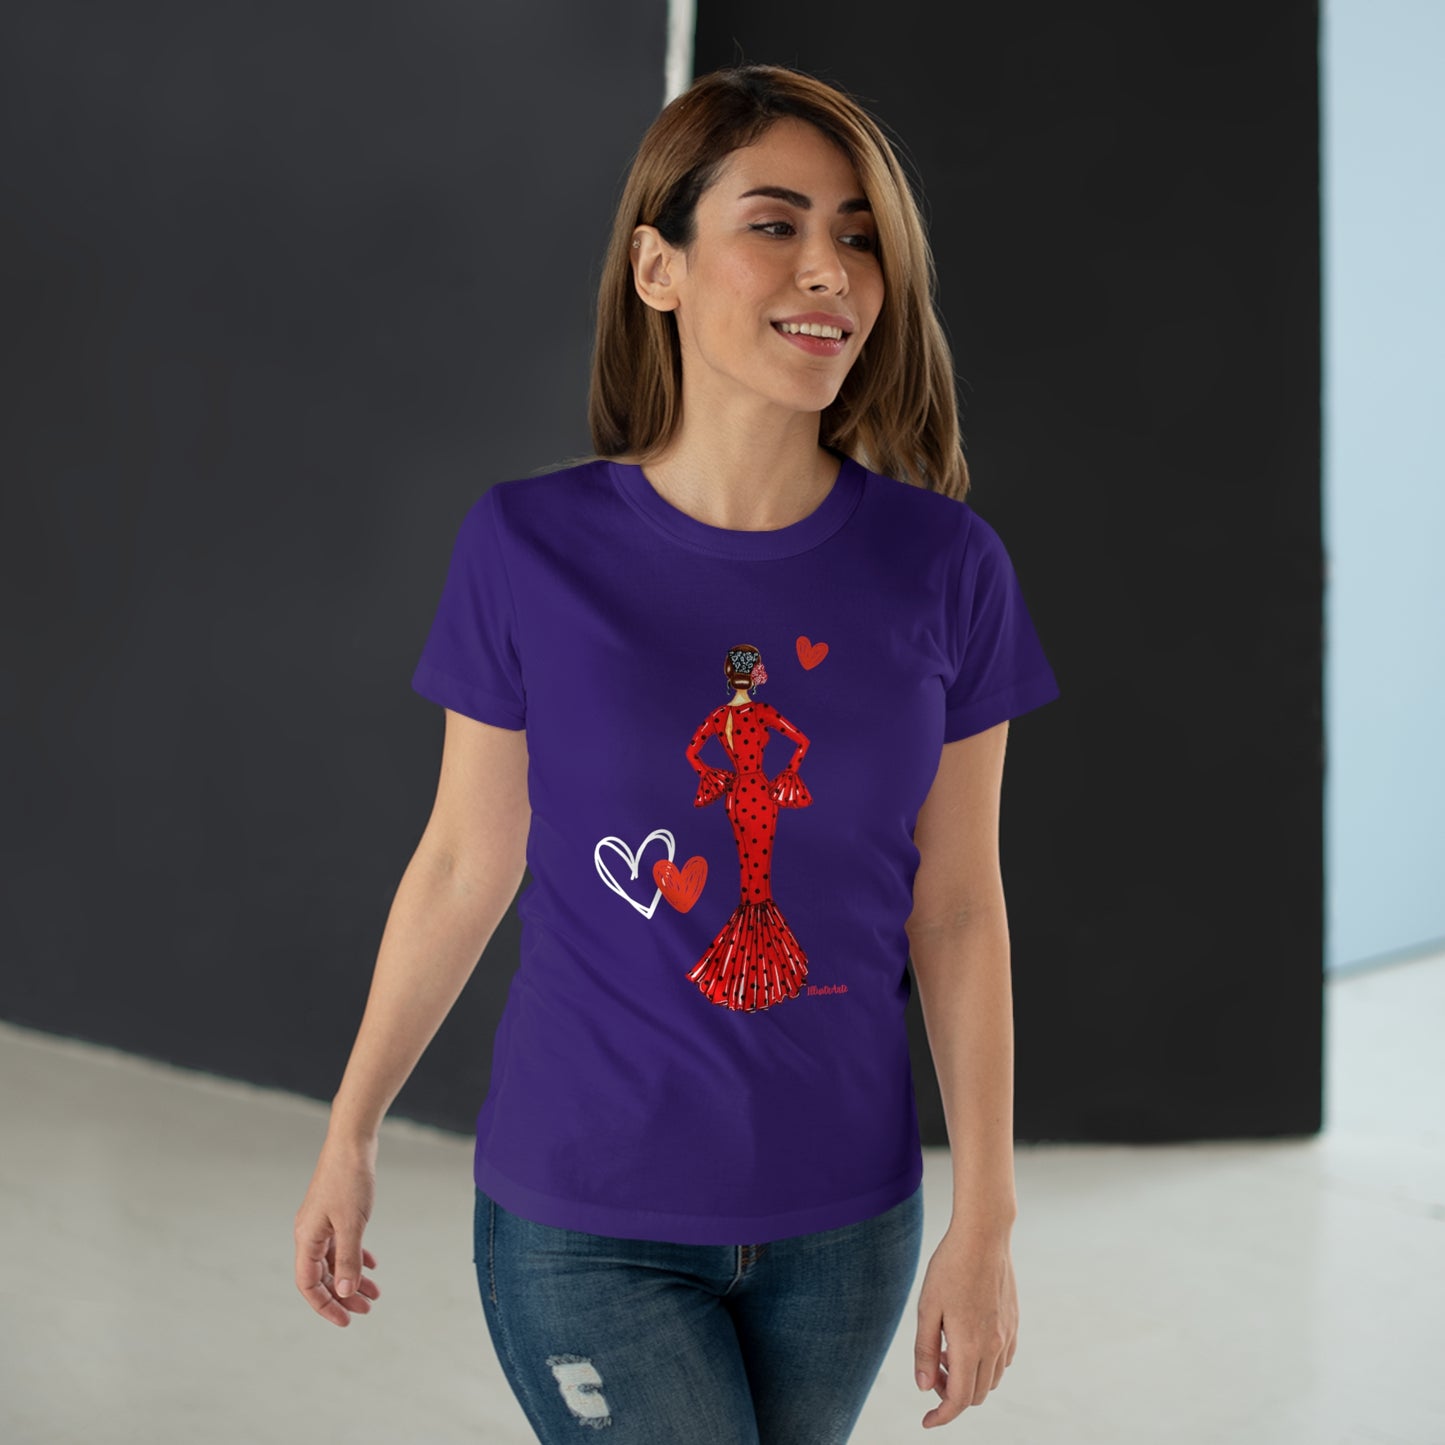 a woman wearing a purple t - shirt with a red dress and hearts on it